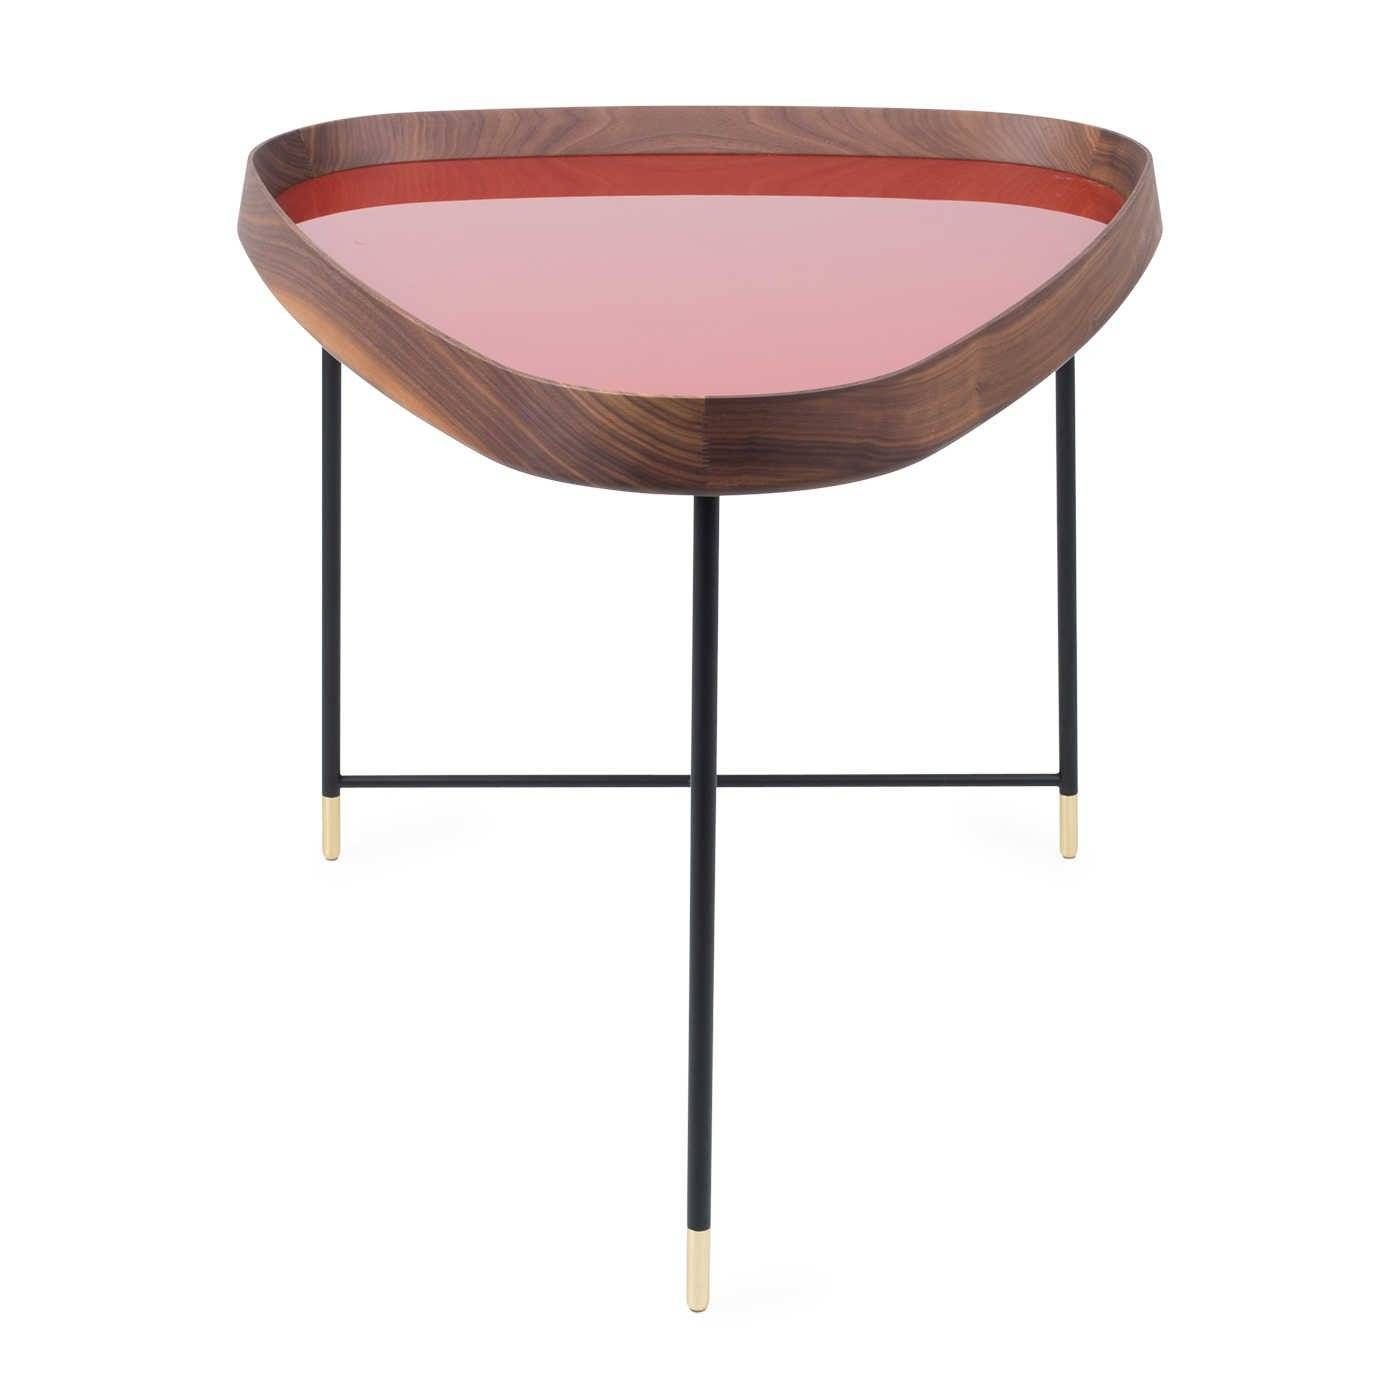 Fritz 3 Triangular Side Table Walnut Granata Red Gloss Lacquer With Regard To Red Gloss Coffee Tables (View 20 of 30)